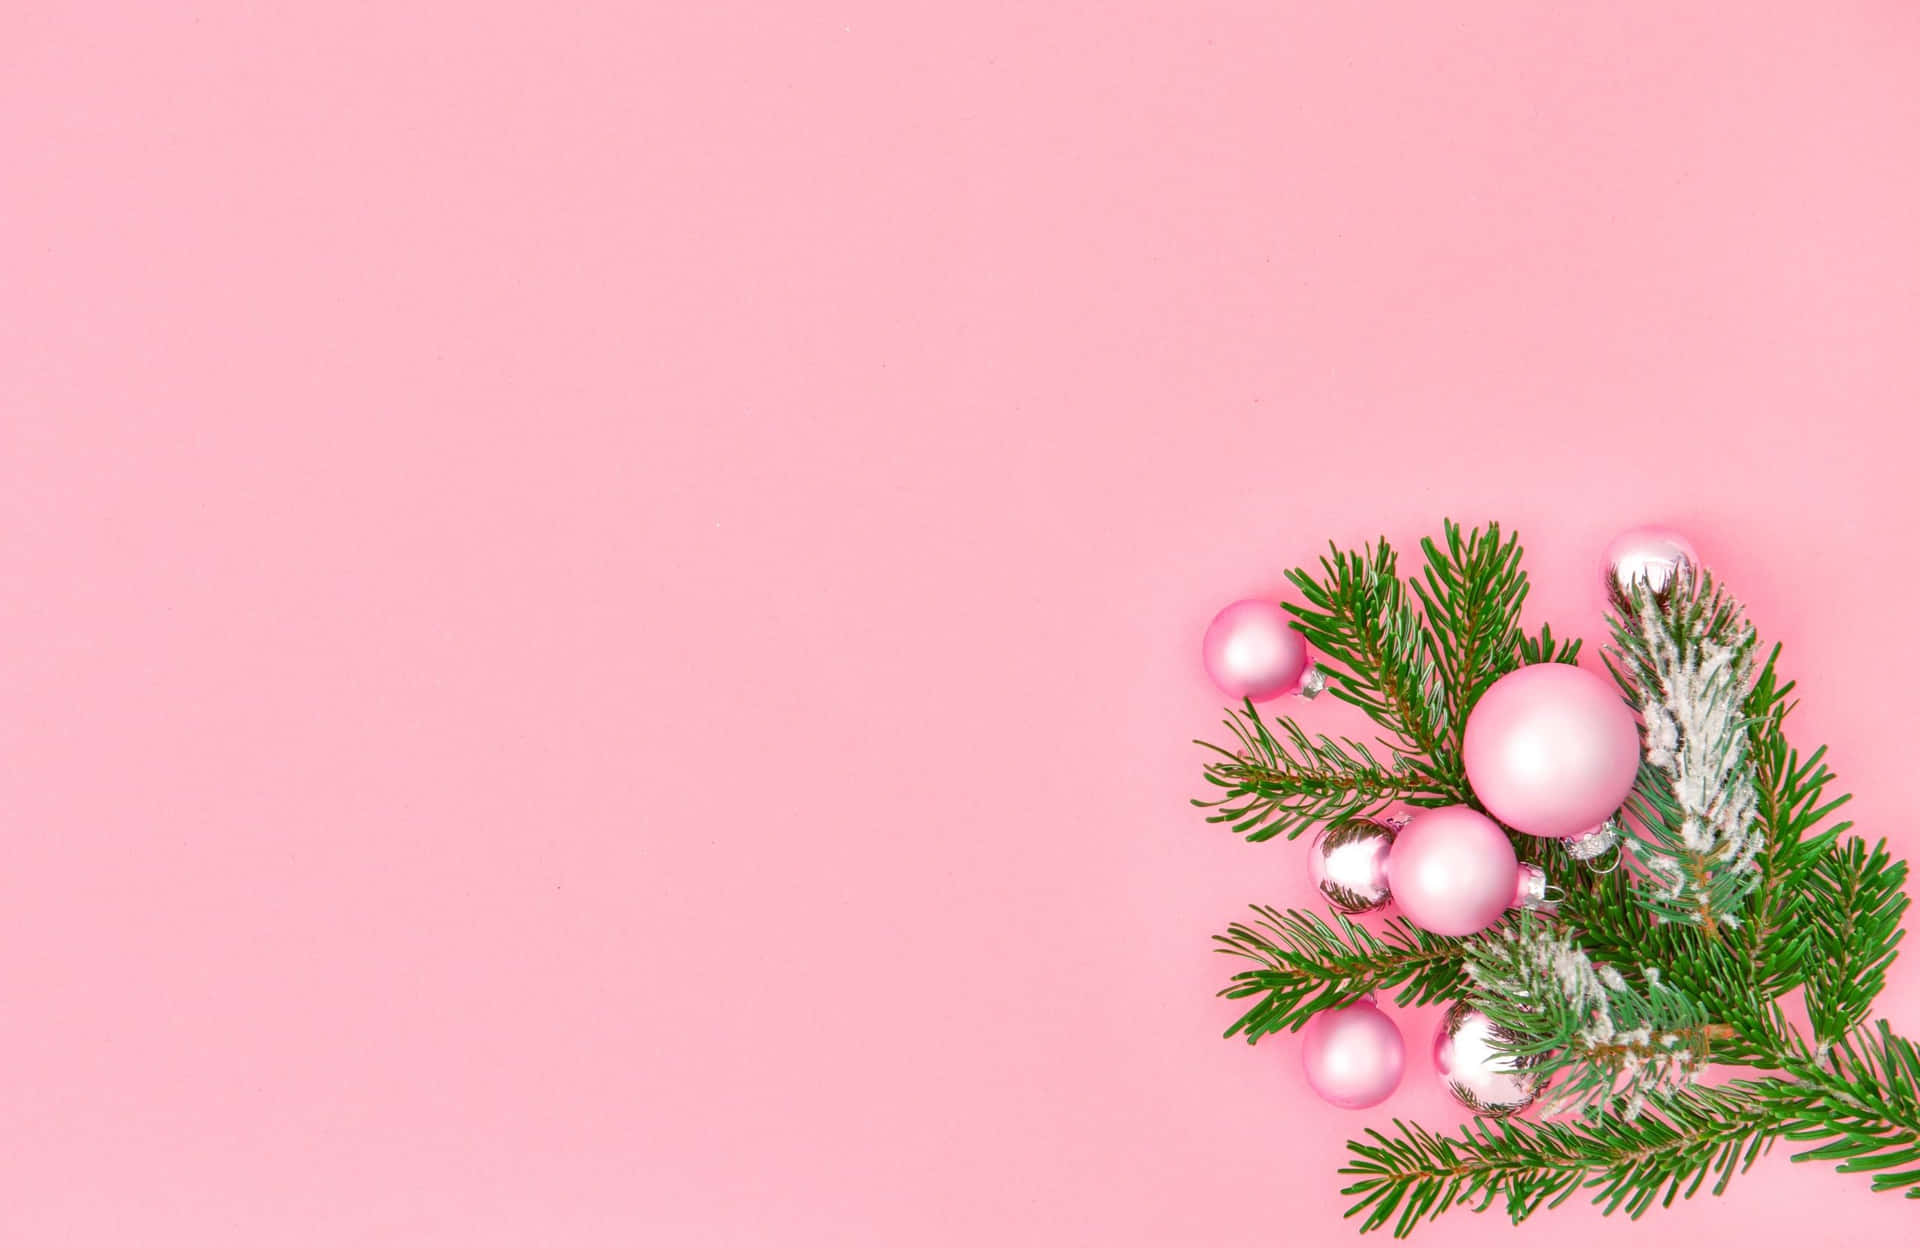 Download A festive pink Christmas background | Wallpapers.com